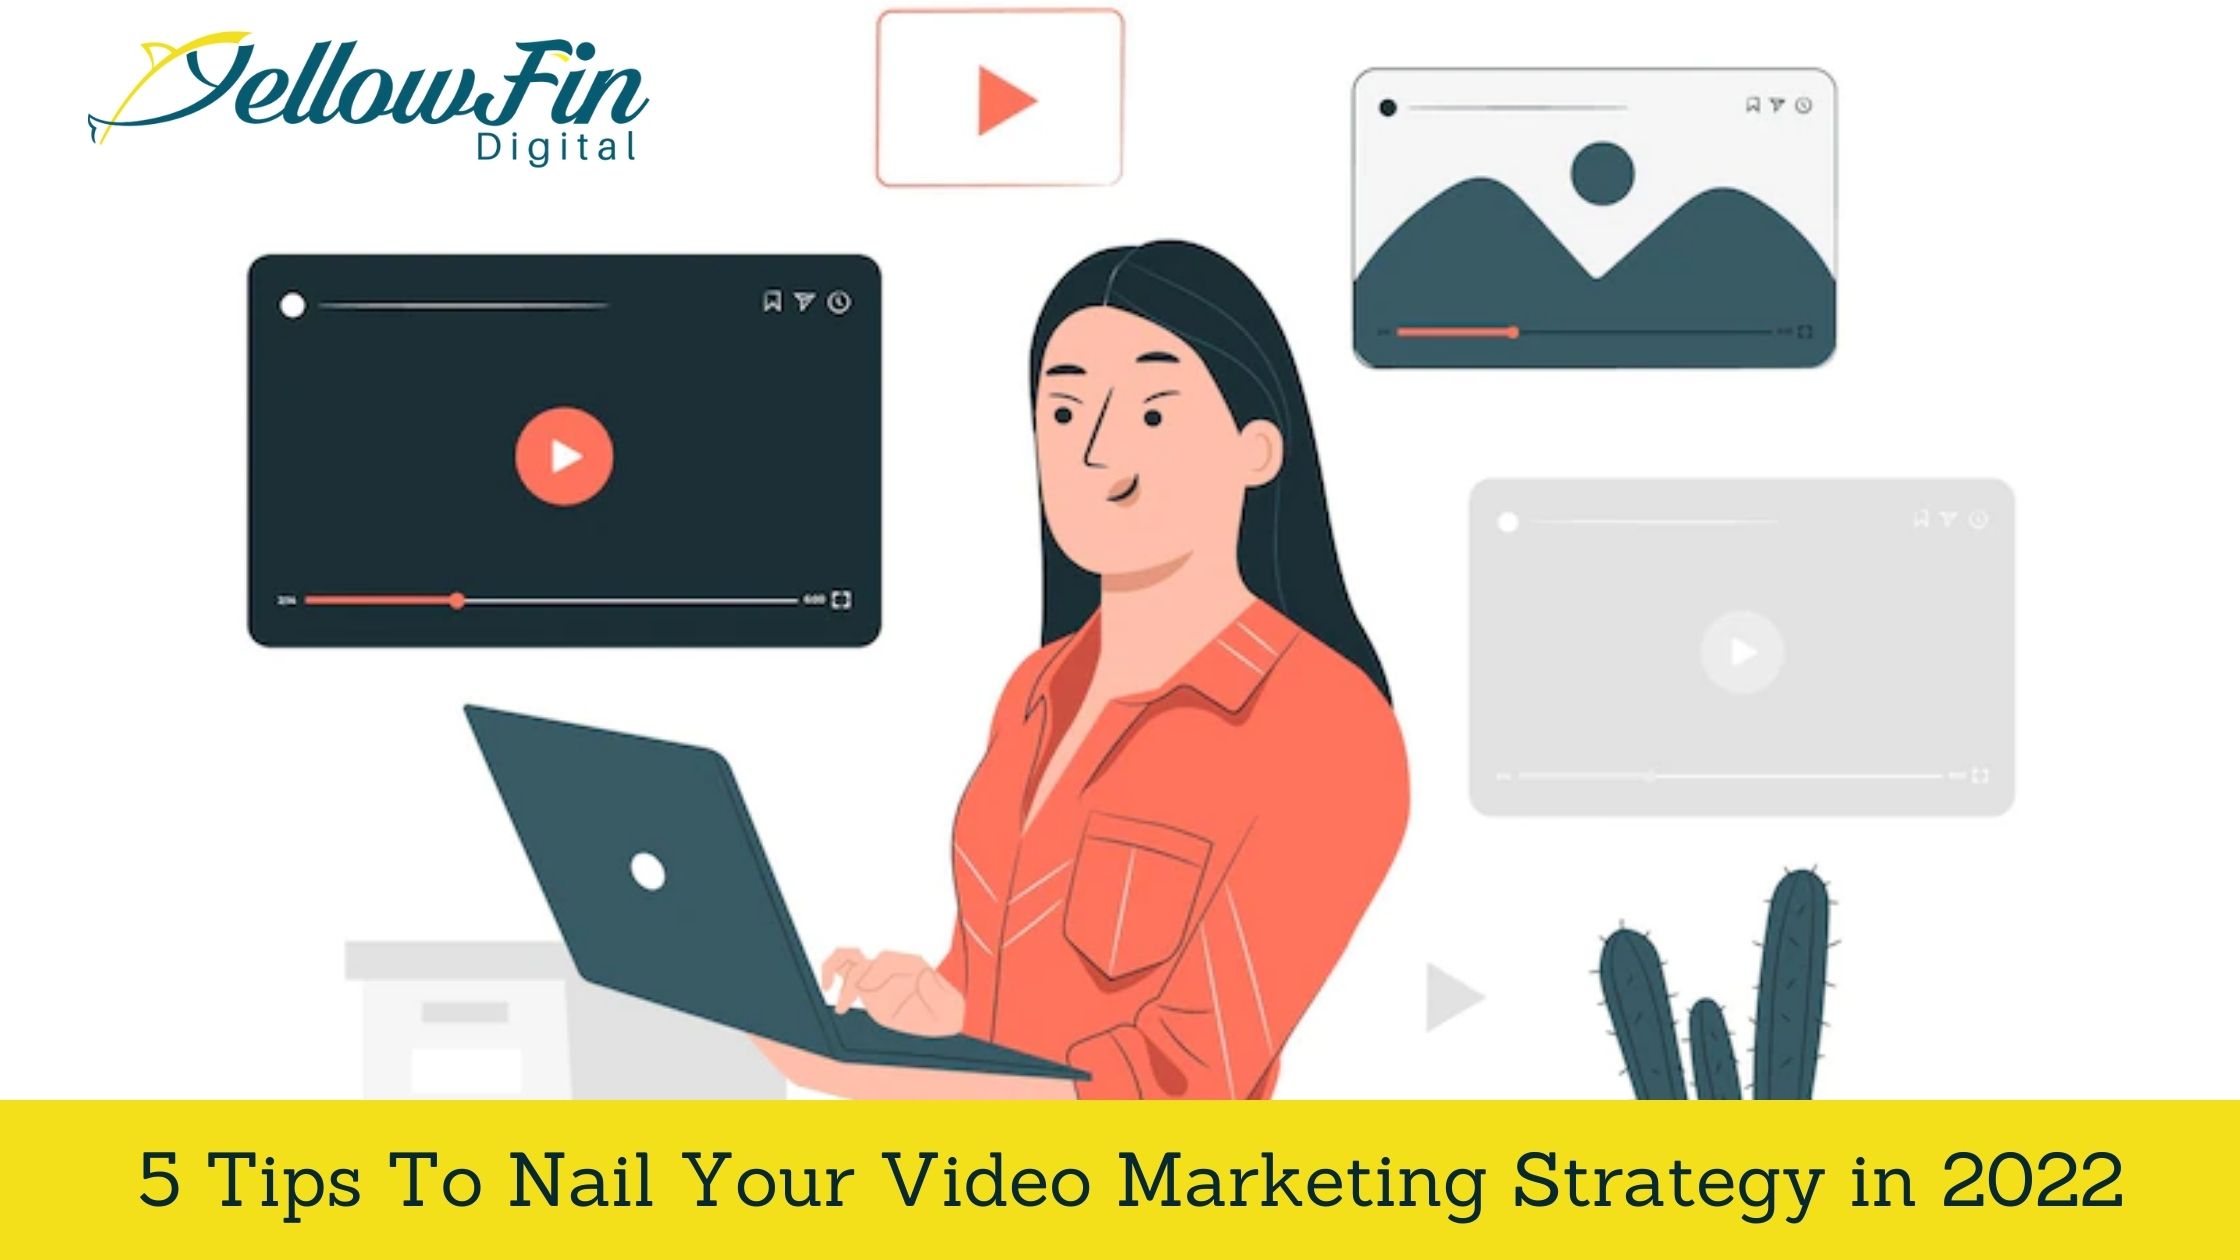 5 Tips To Nail Your Video Marketing Strategy in 2022